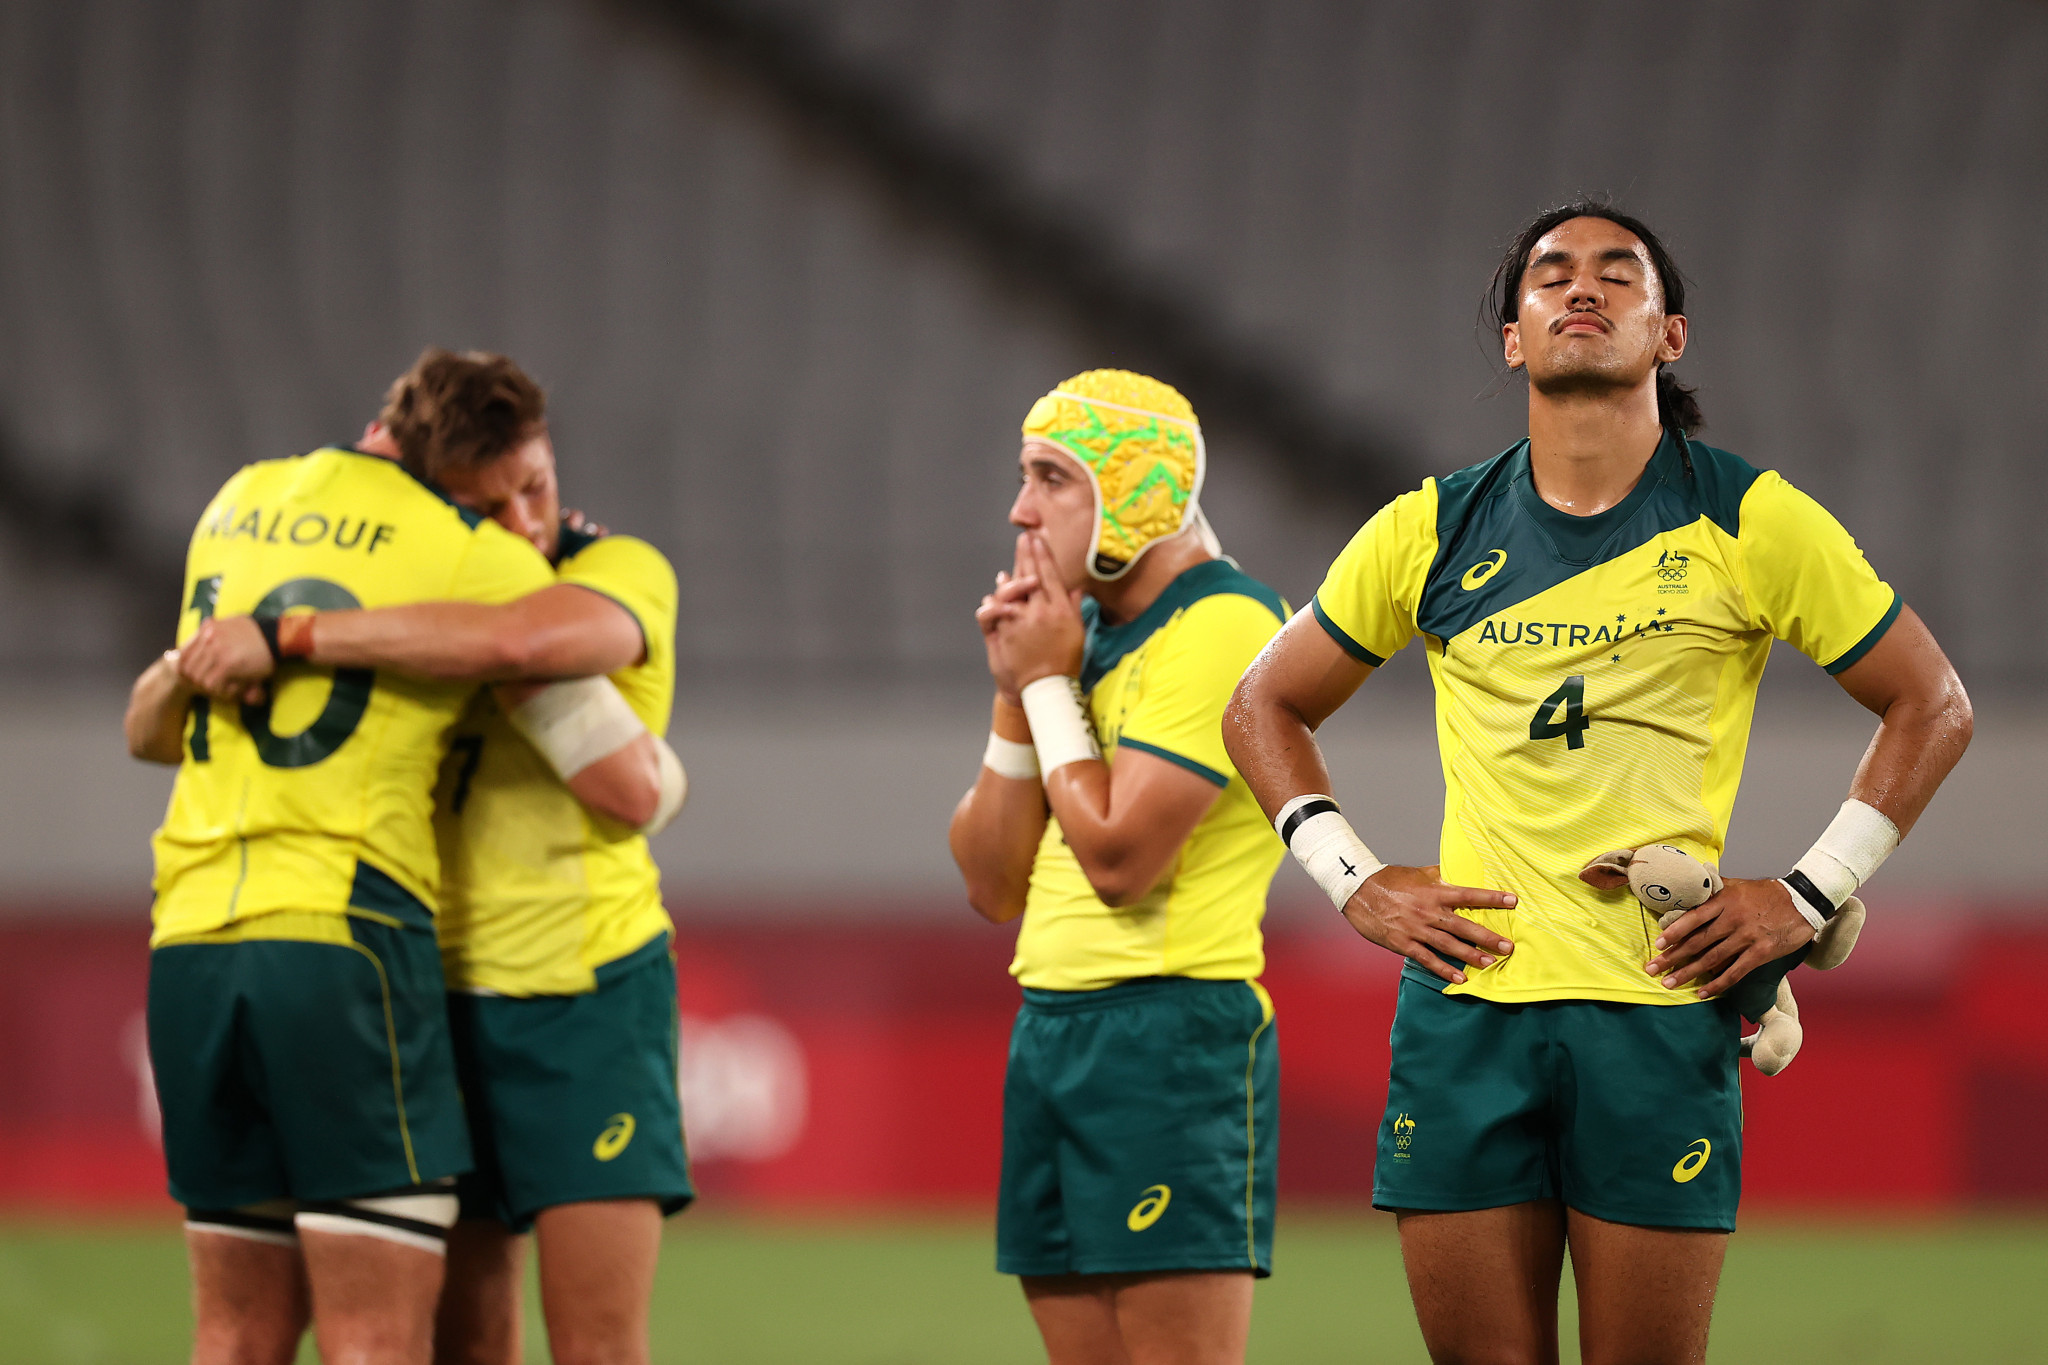 Members of Australia's rugby sevens team have been accused of causing trouble on a flight back home ©Getty Images